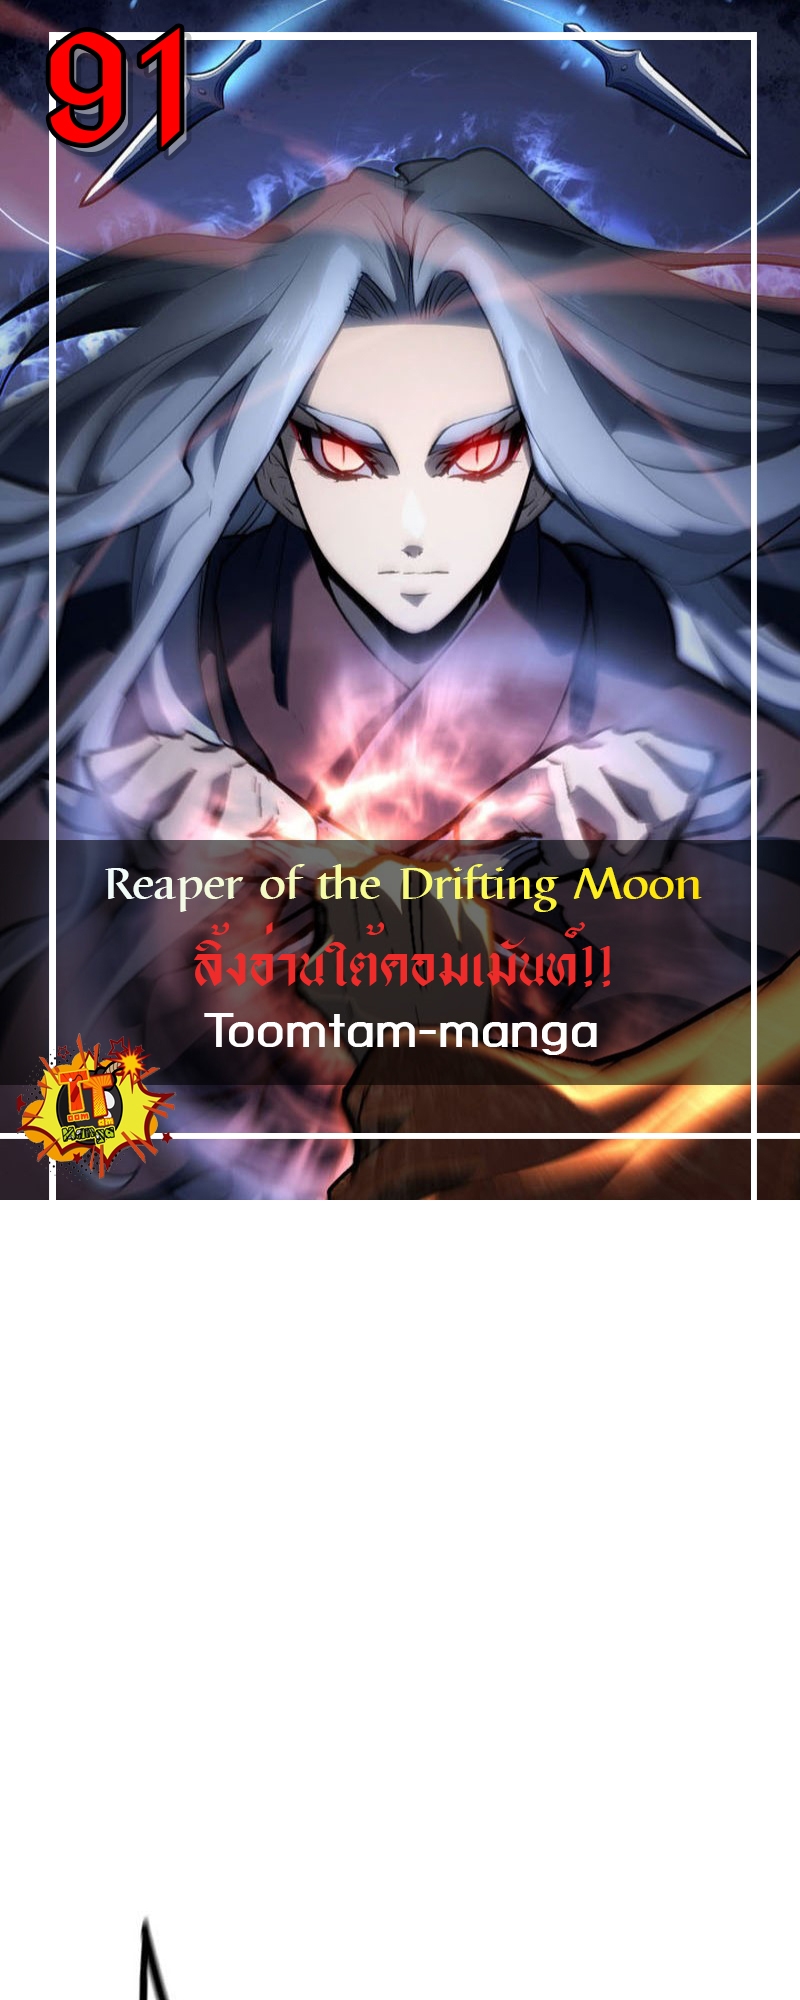 Reaper of the Drifting Moon 91 13 06 25670001